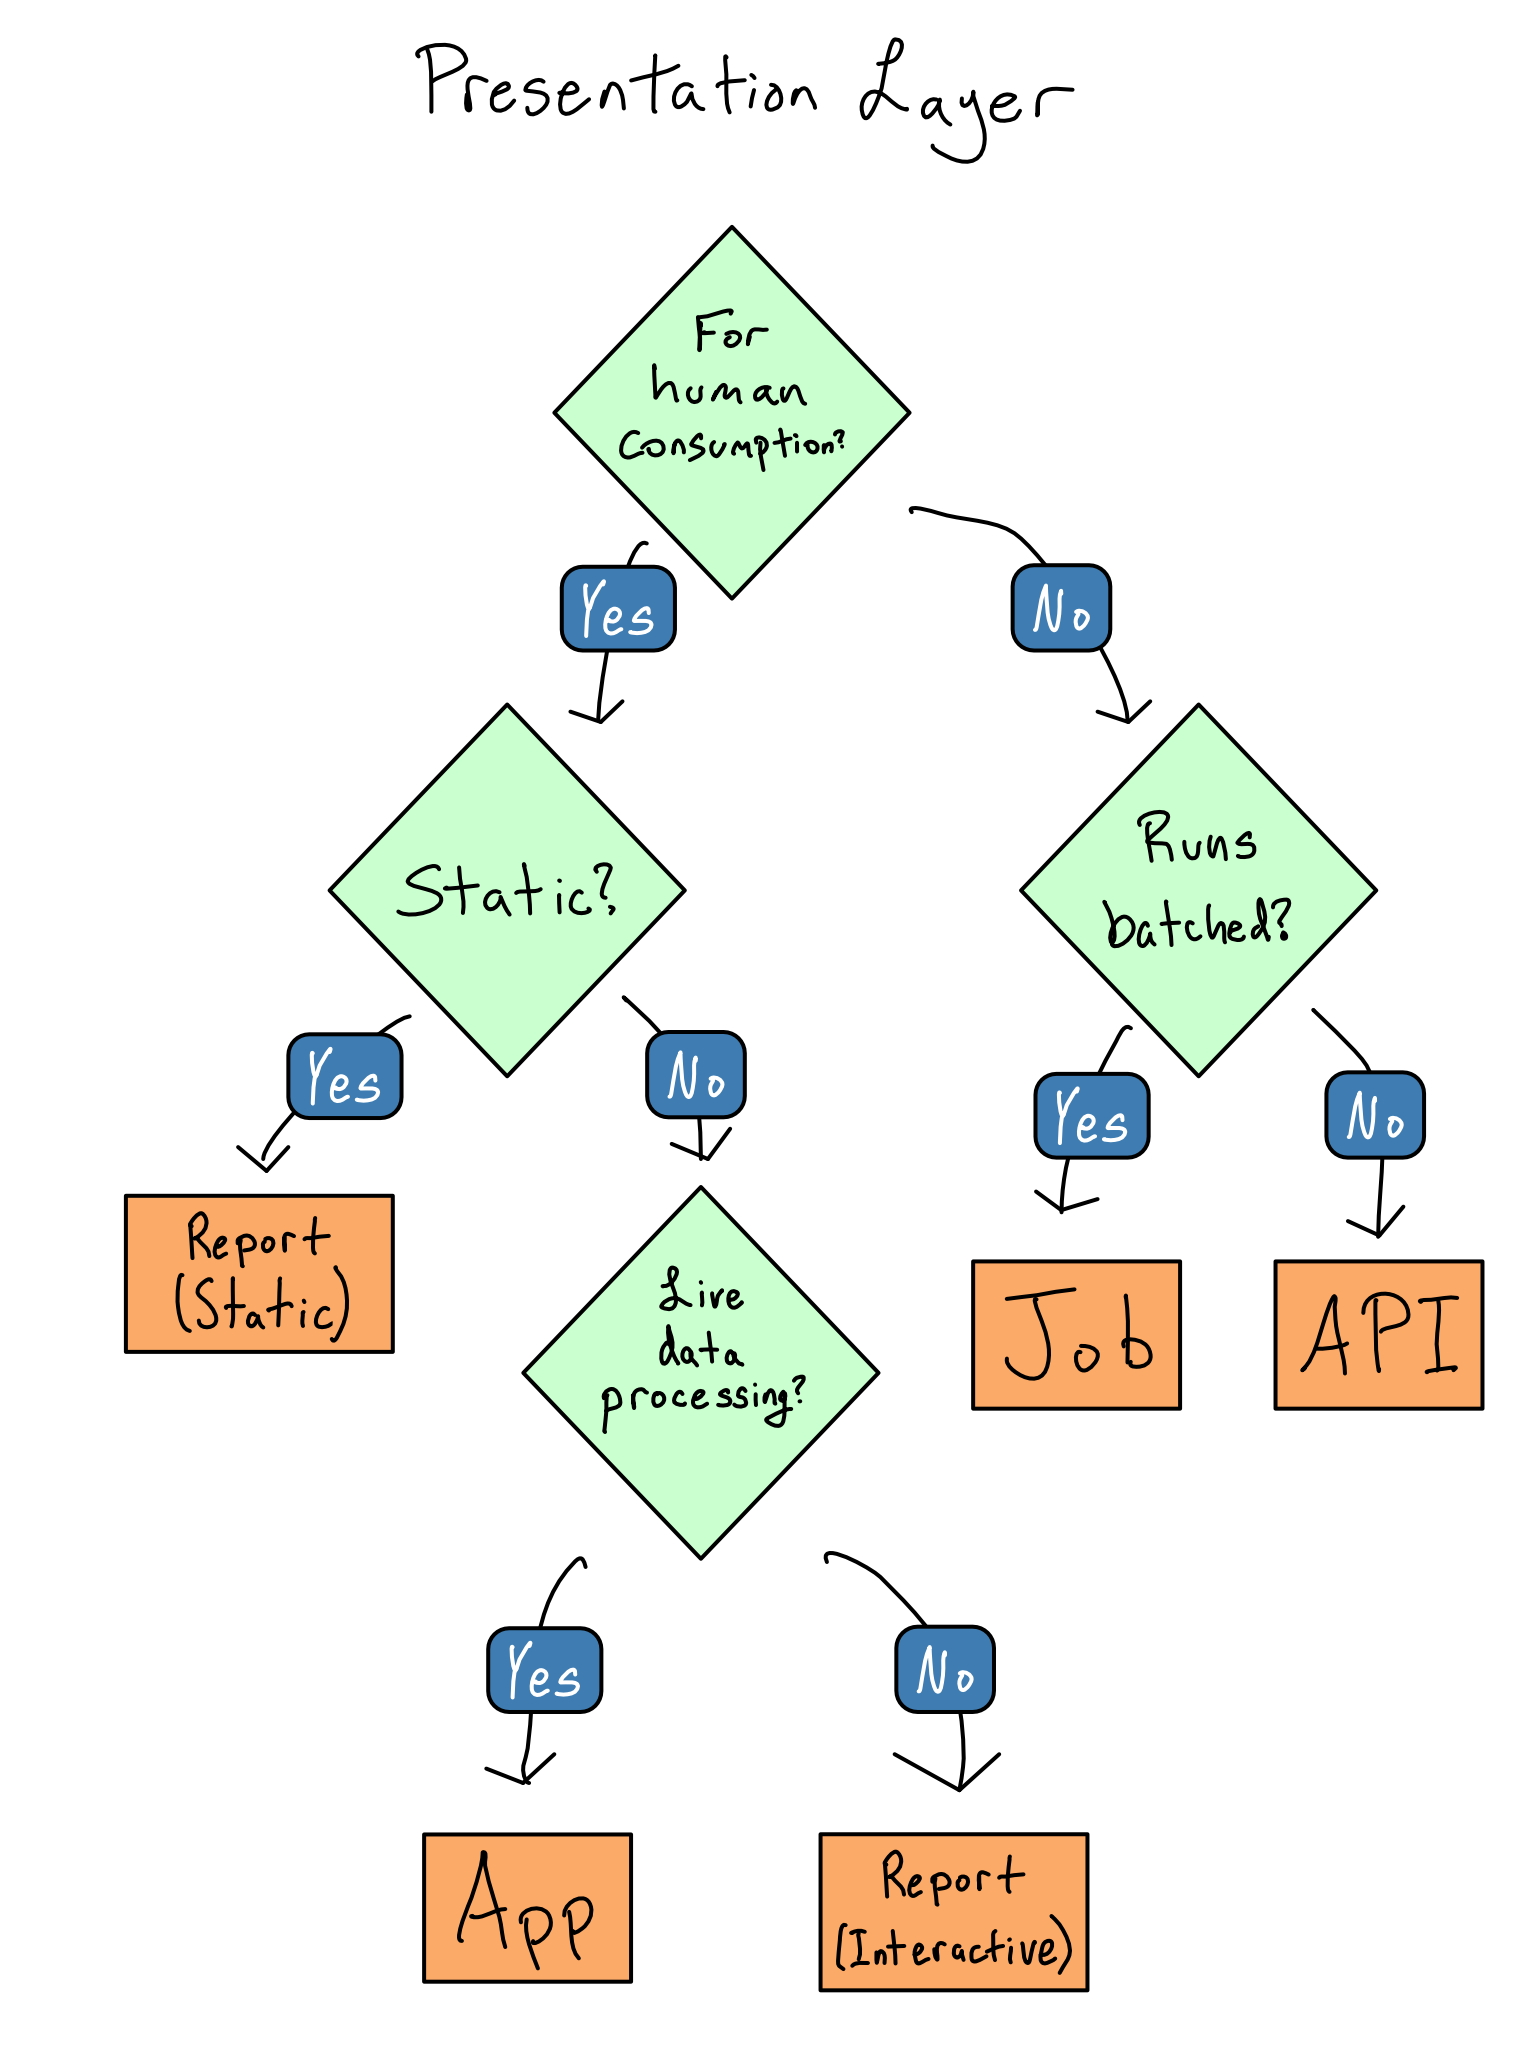 A flow chart of choosing an App, Report, API, or Job for the presentation layer as described in this section.